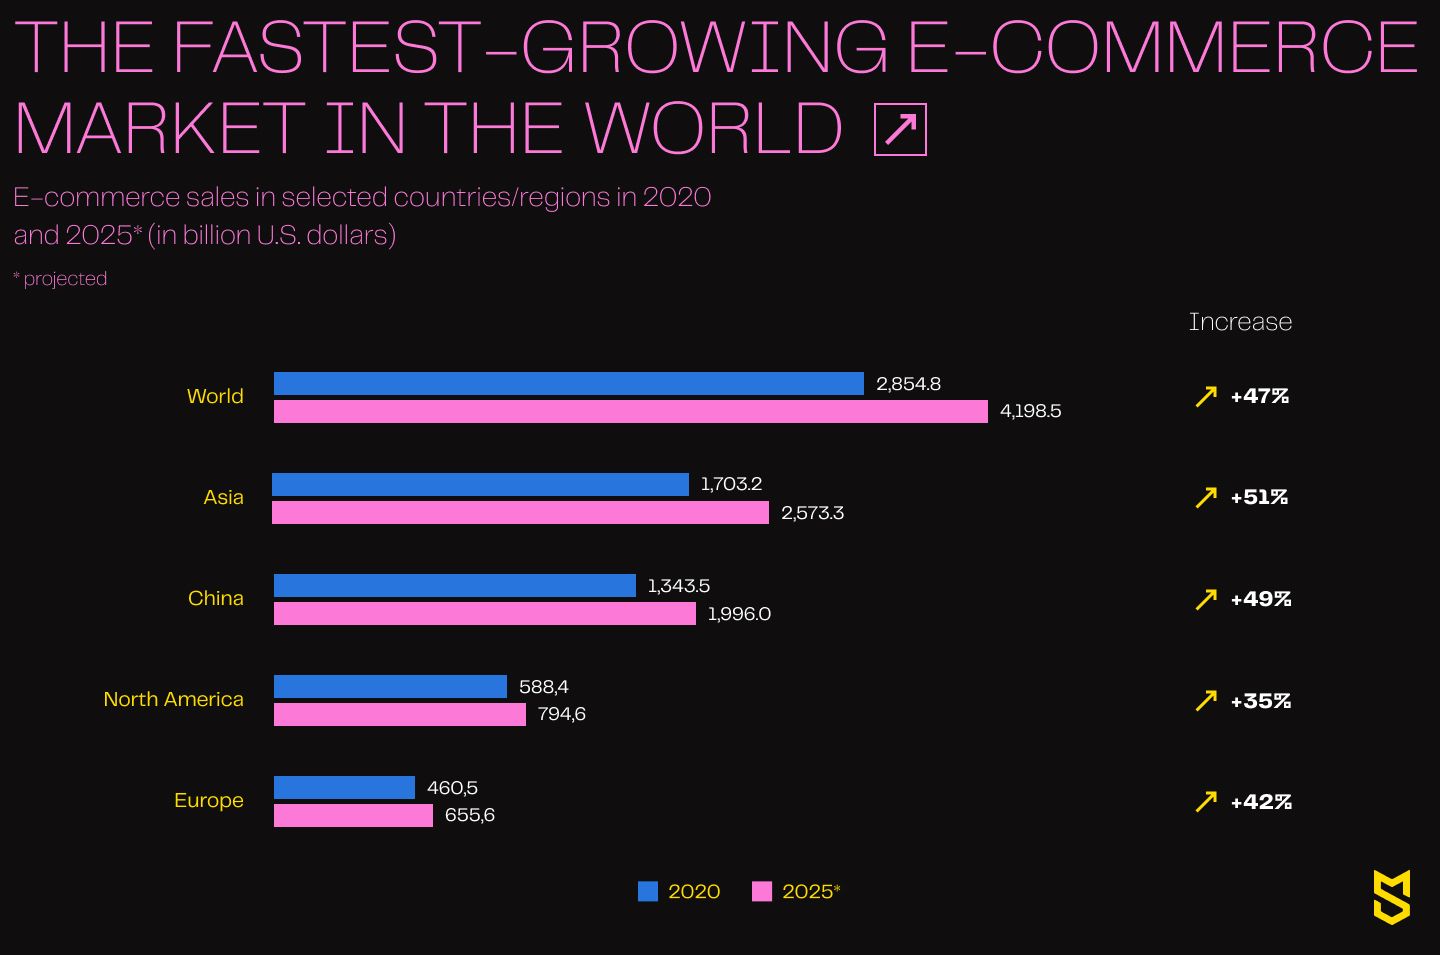 The fastest-growing e-commerce market in the world